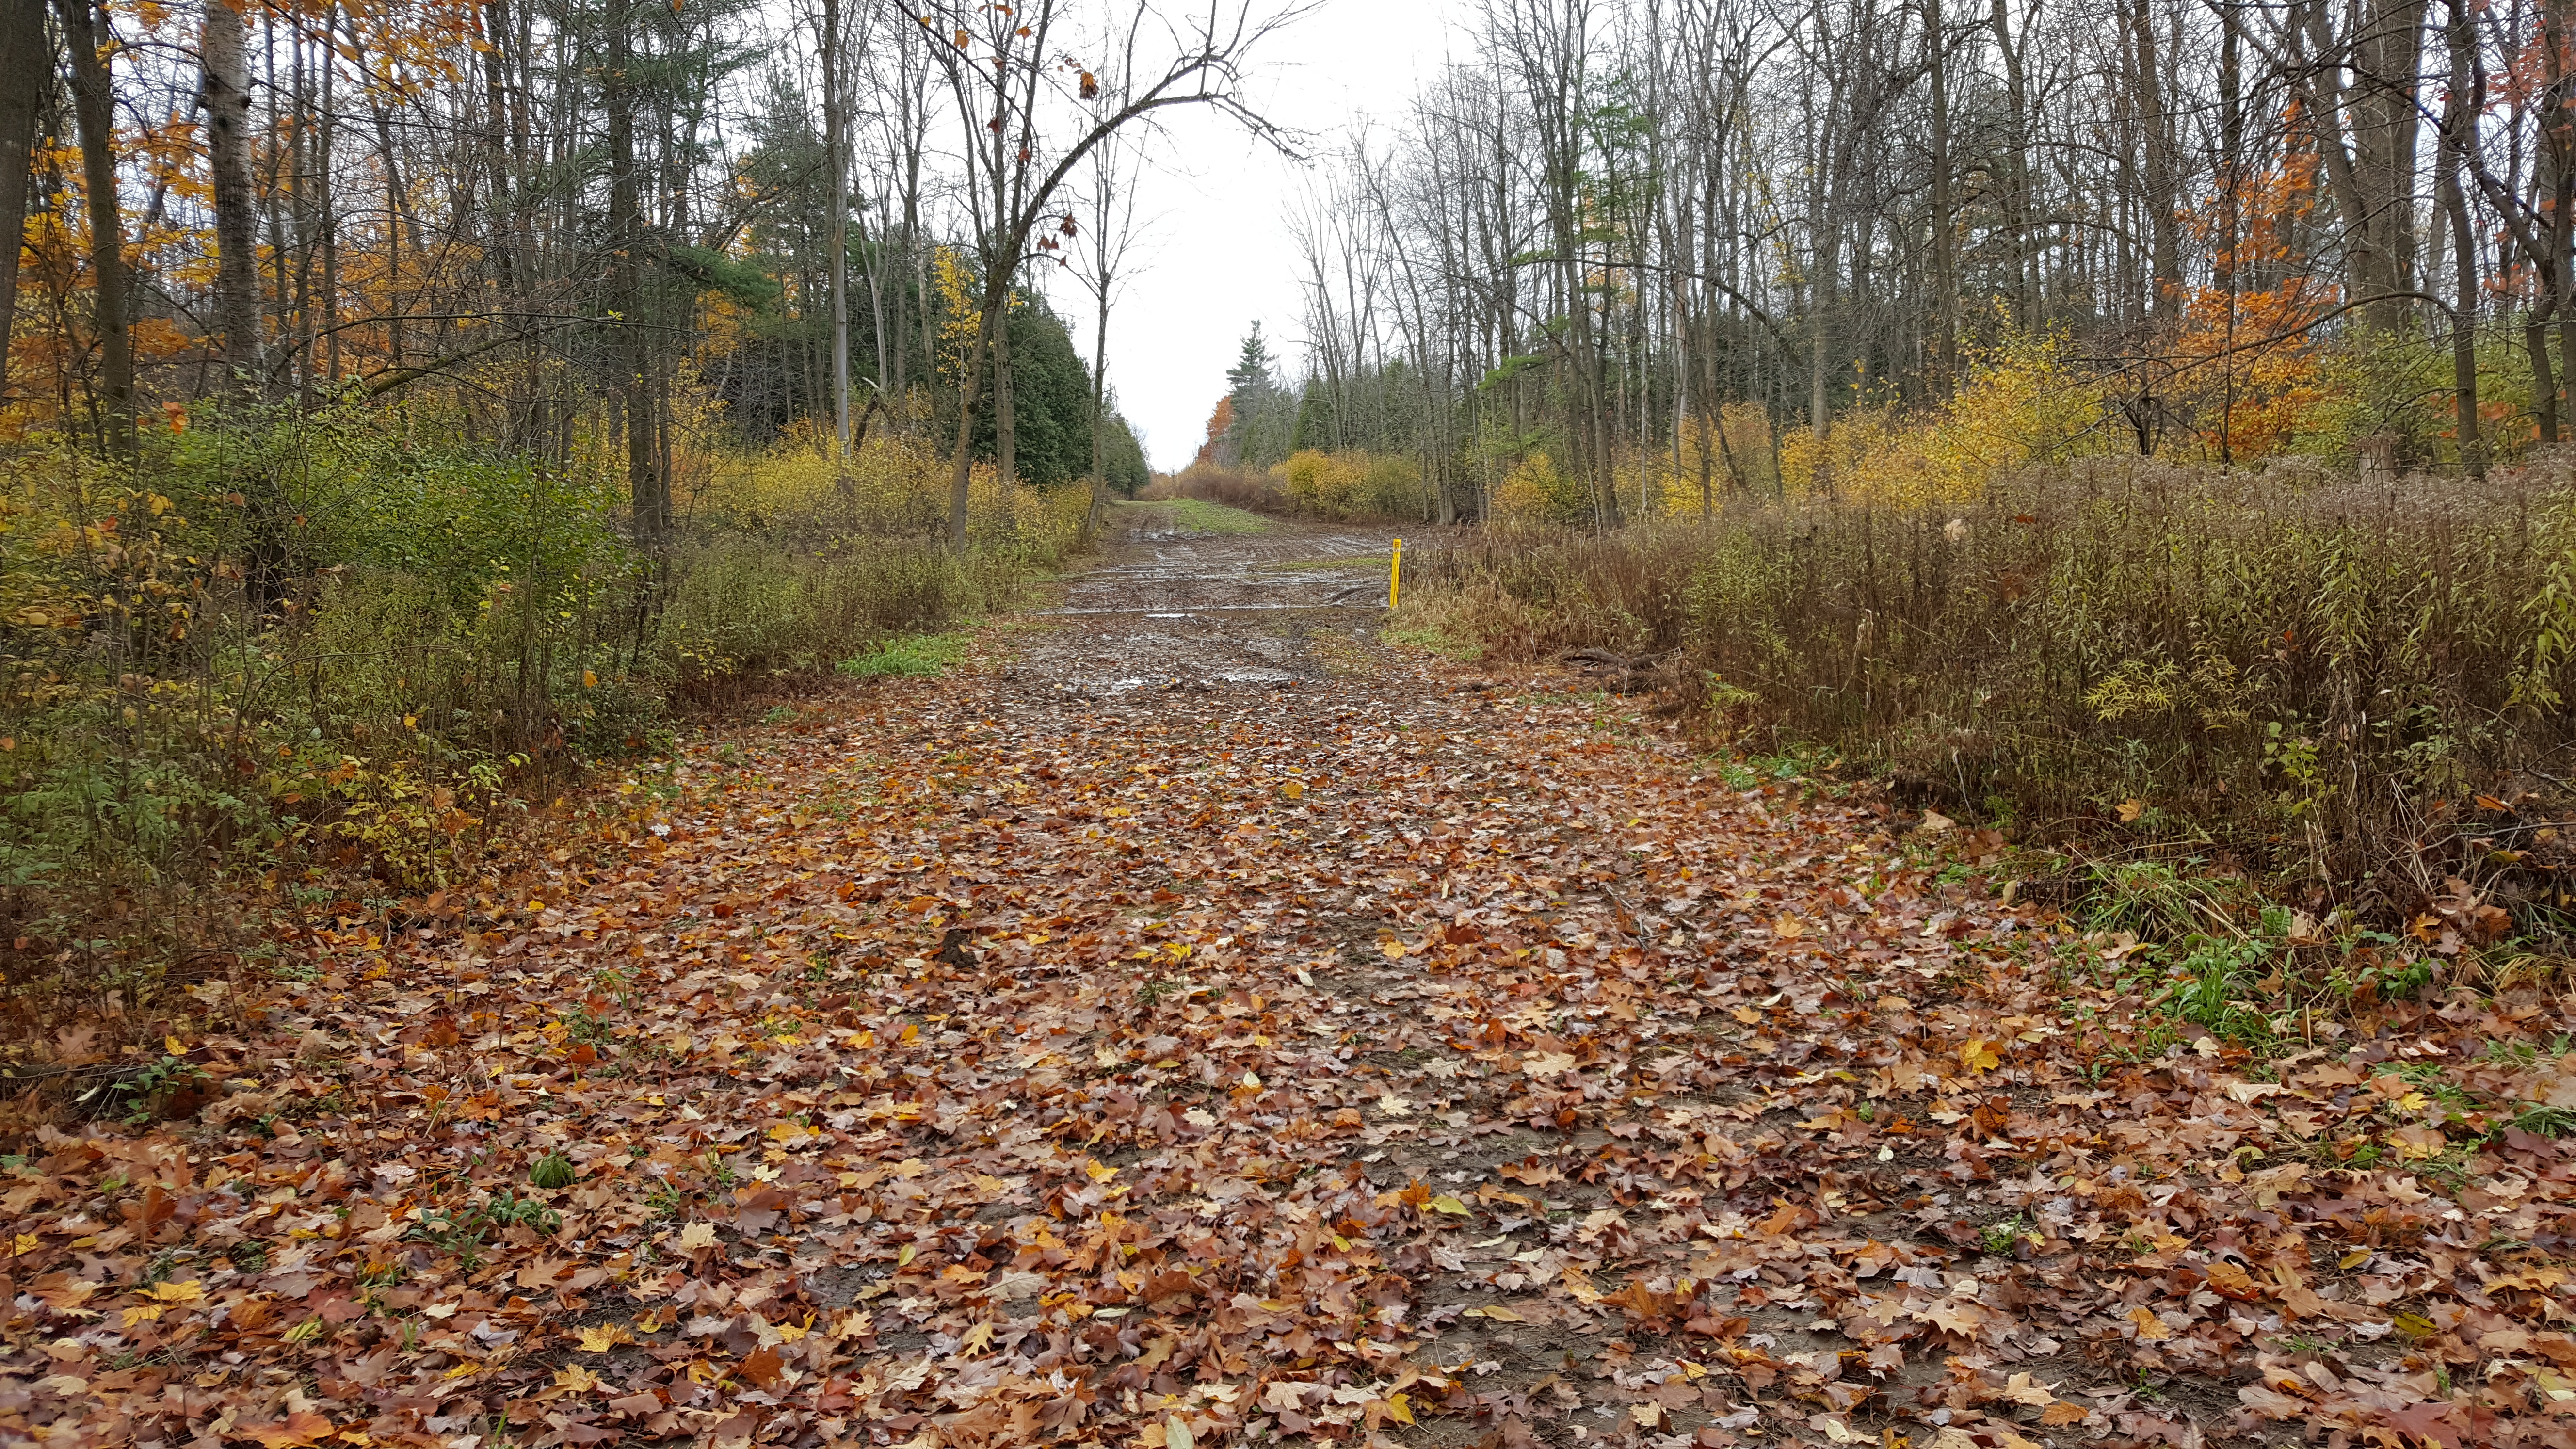 Transnorthern Pipeline trail in the fall